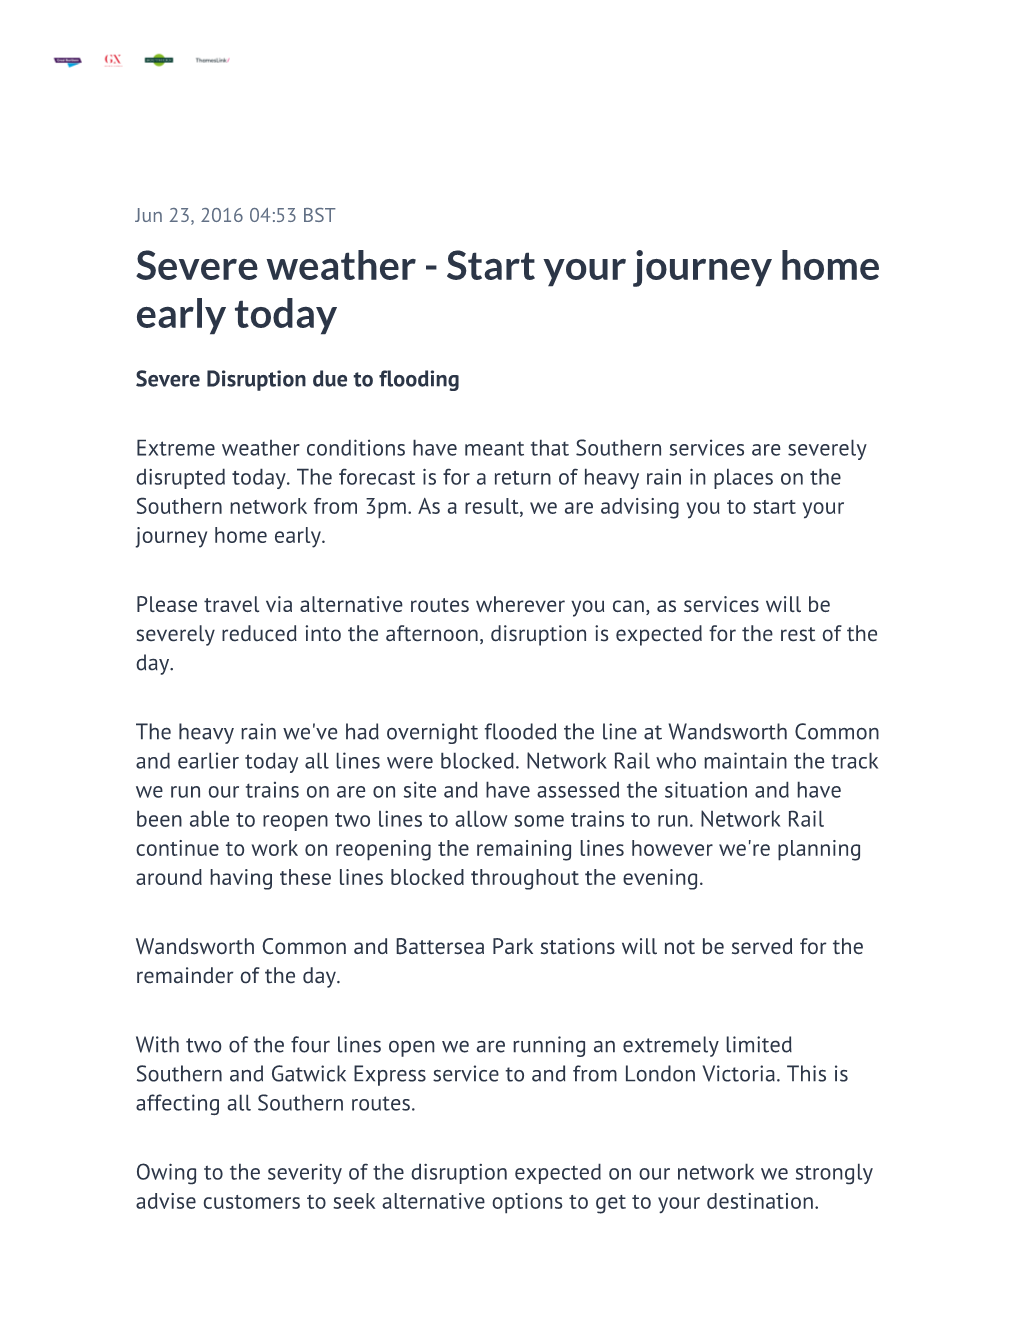 Severe Weather - Start Your Journey Home Early Today